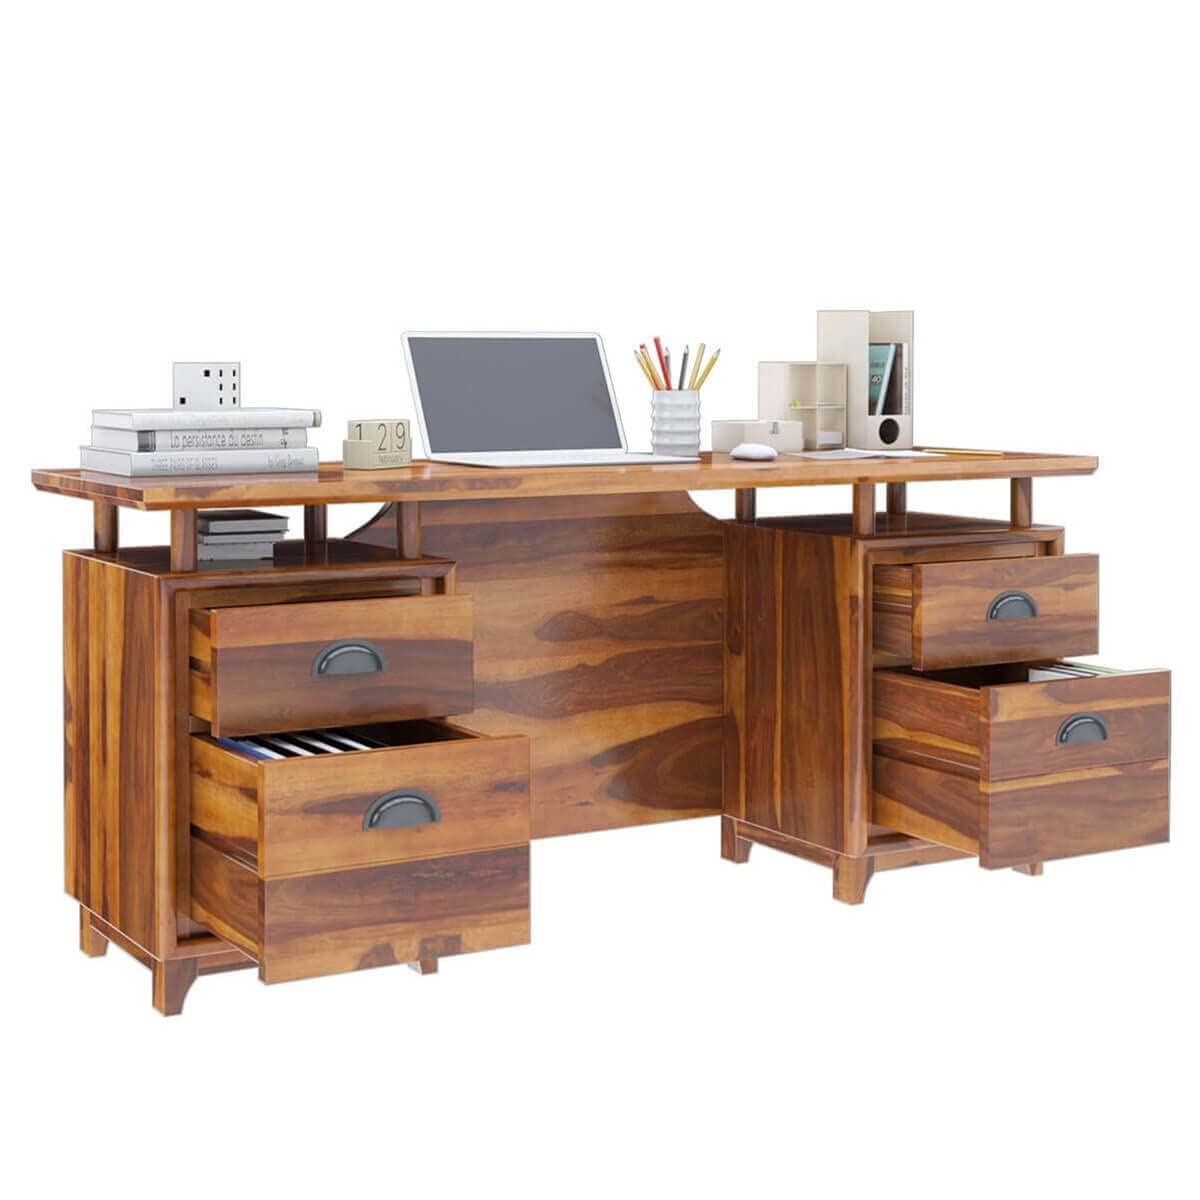 WoodMarwar Solid Sheesham Wooden Study Table with 4 Drawers & Open Shelf Storage Workstation for Home Office & Study Room | Solid Wooden Desk Writing Table | Laptop Computer Table for Adults | Meeting Office Table | Boss Table